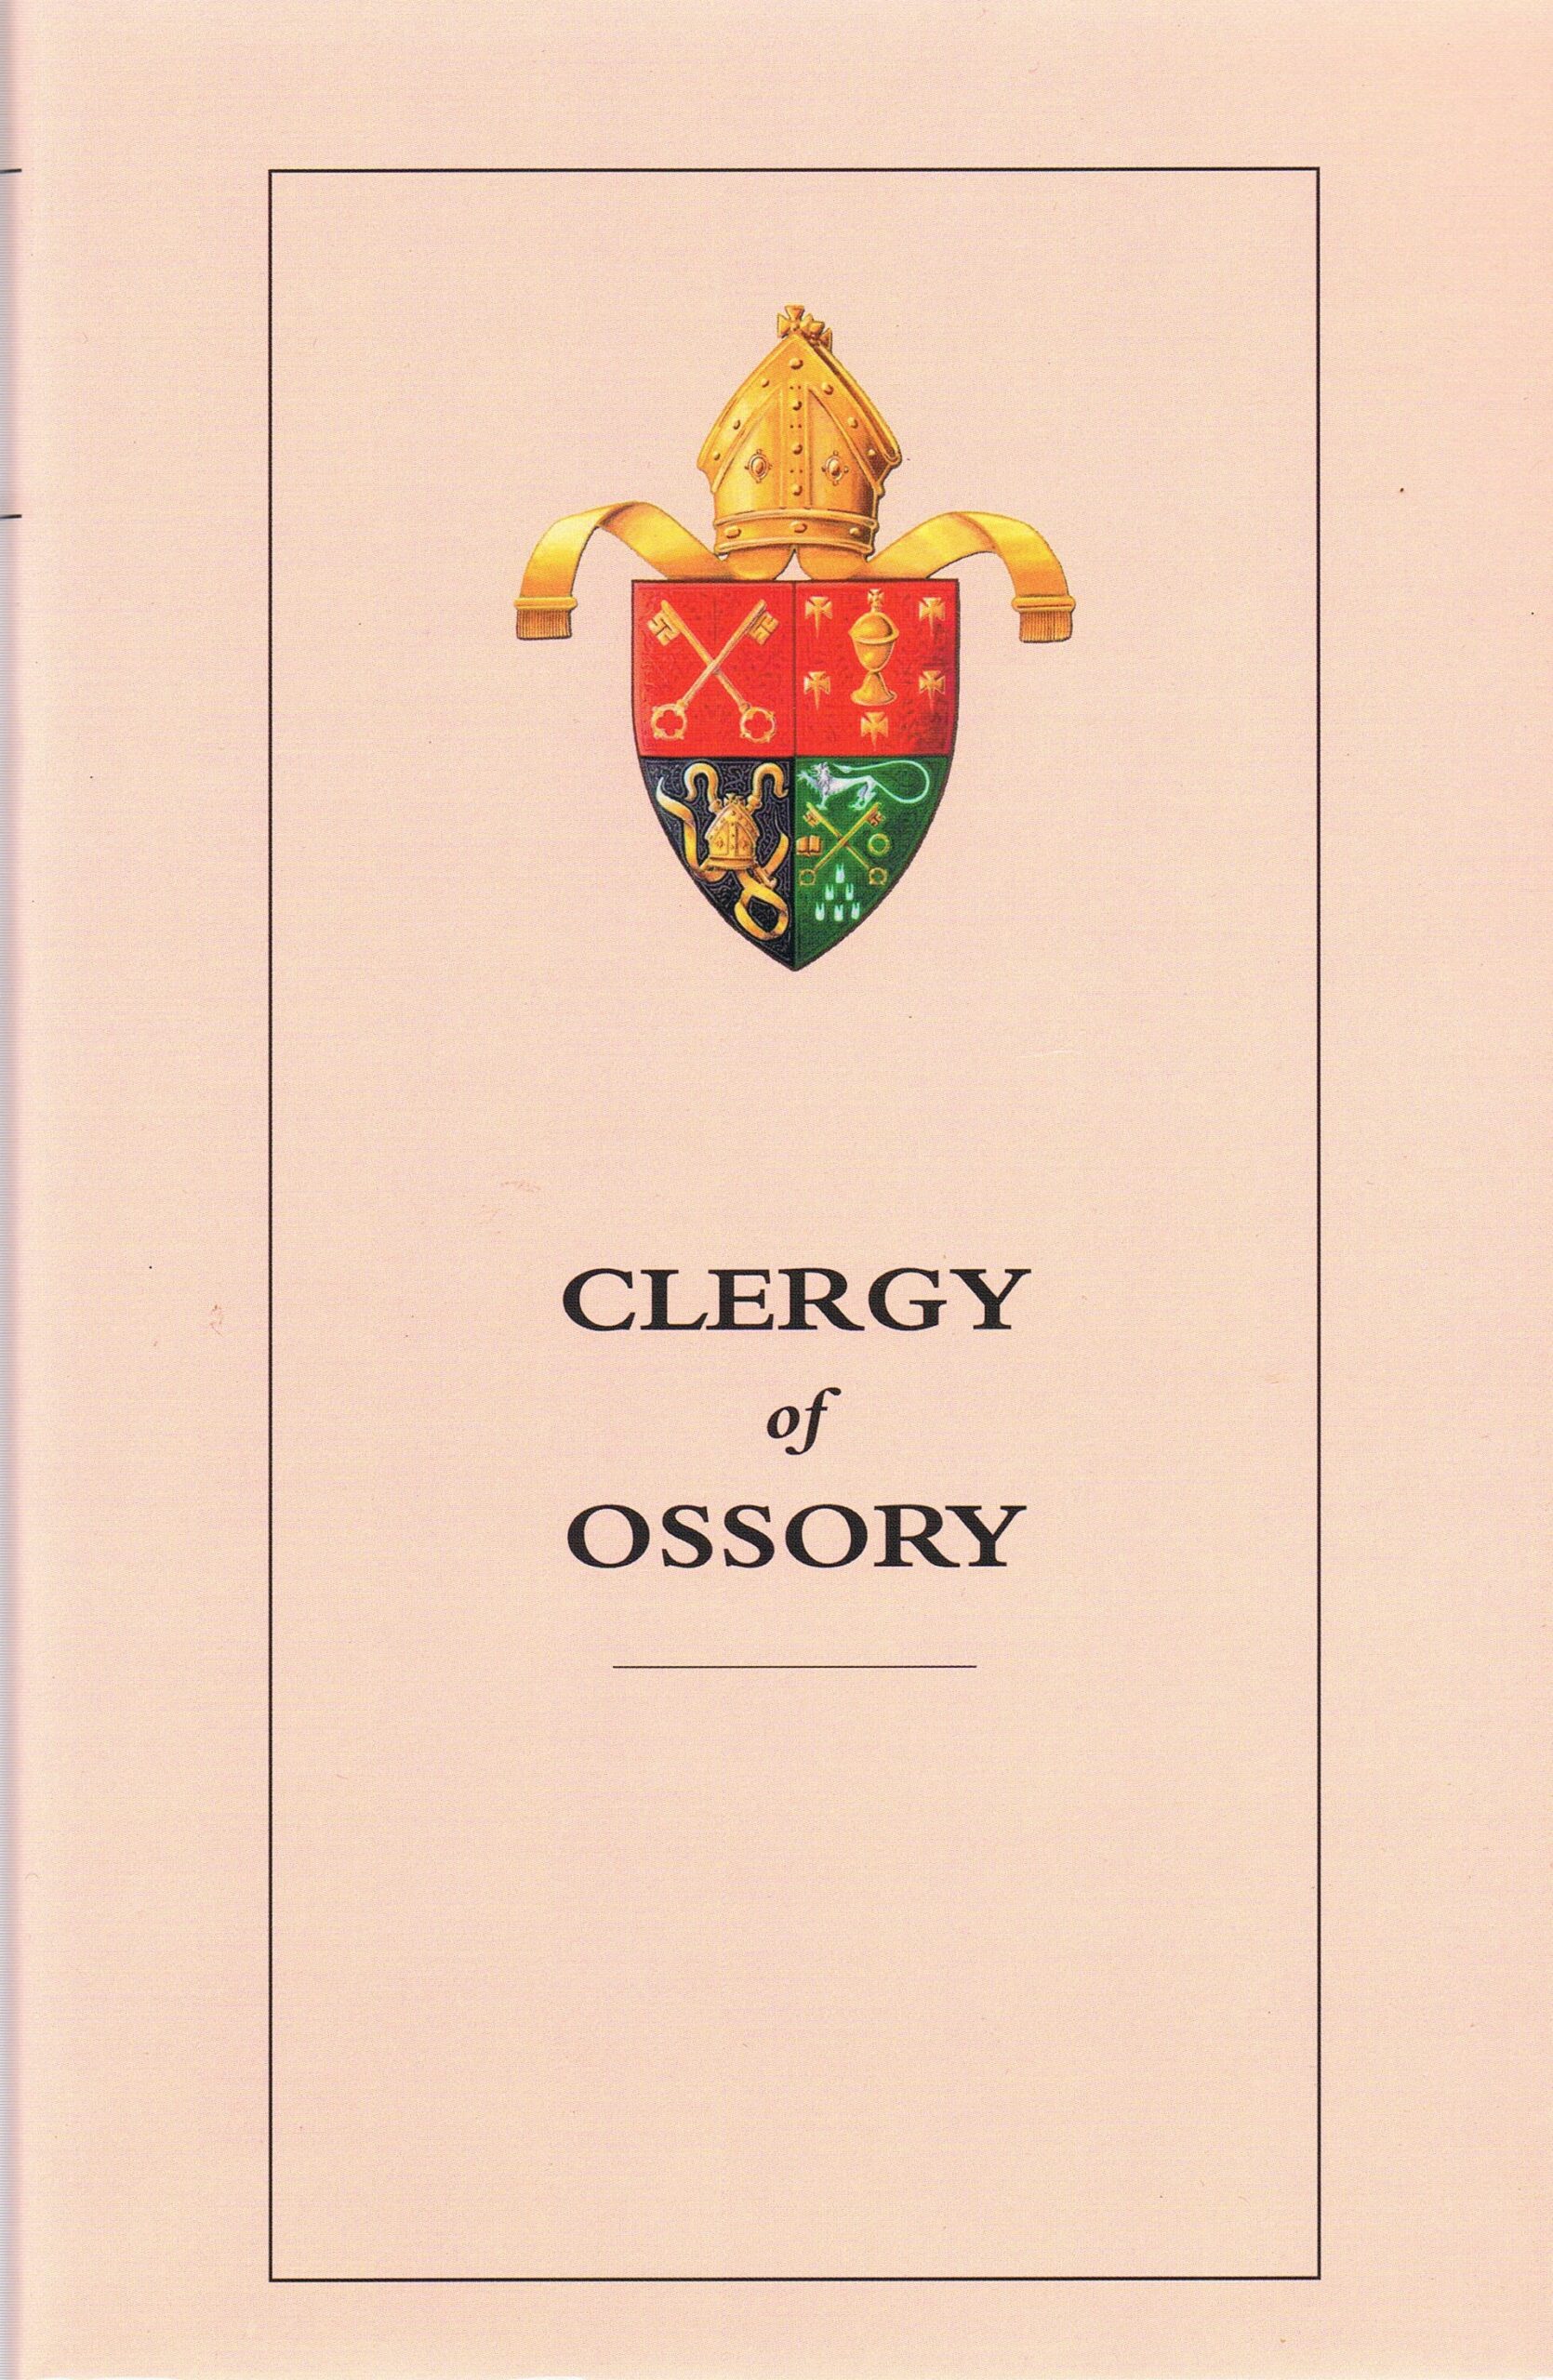 Clergy of Ossory by D.W.T. Crooks